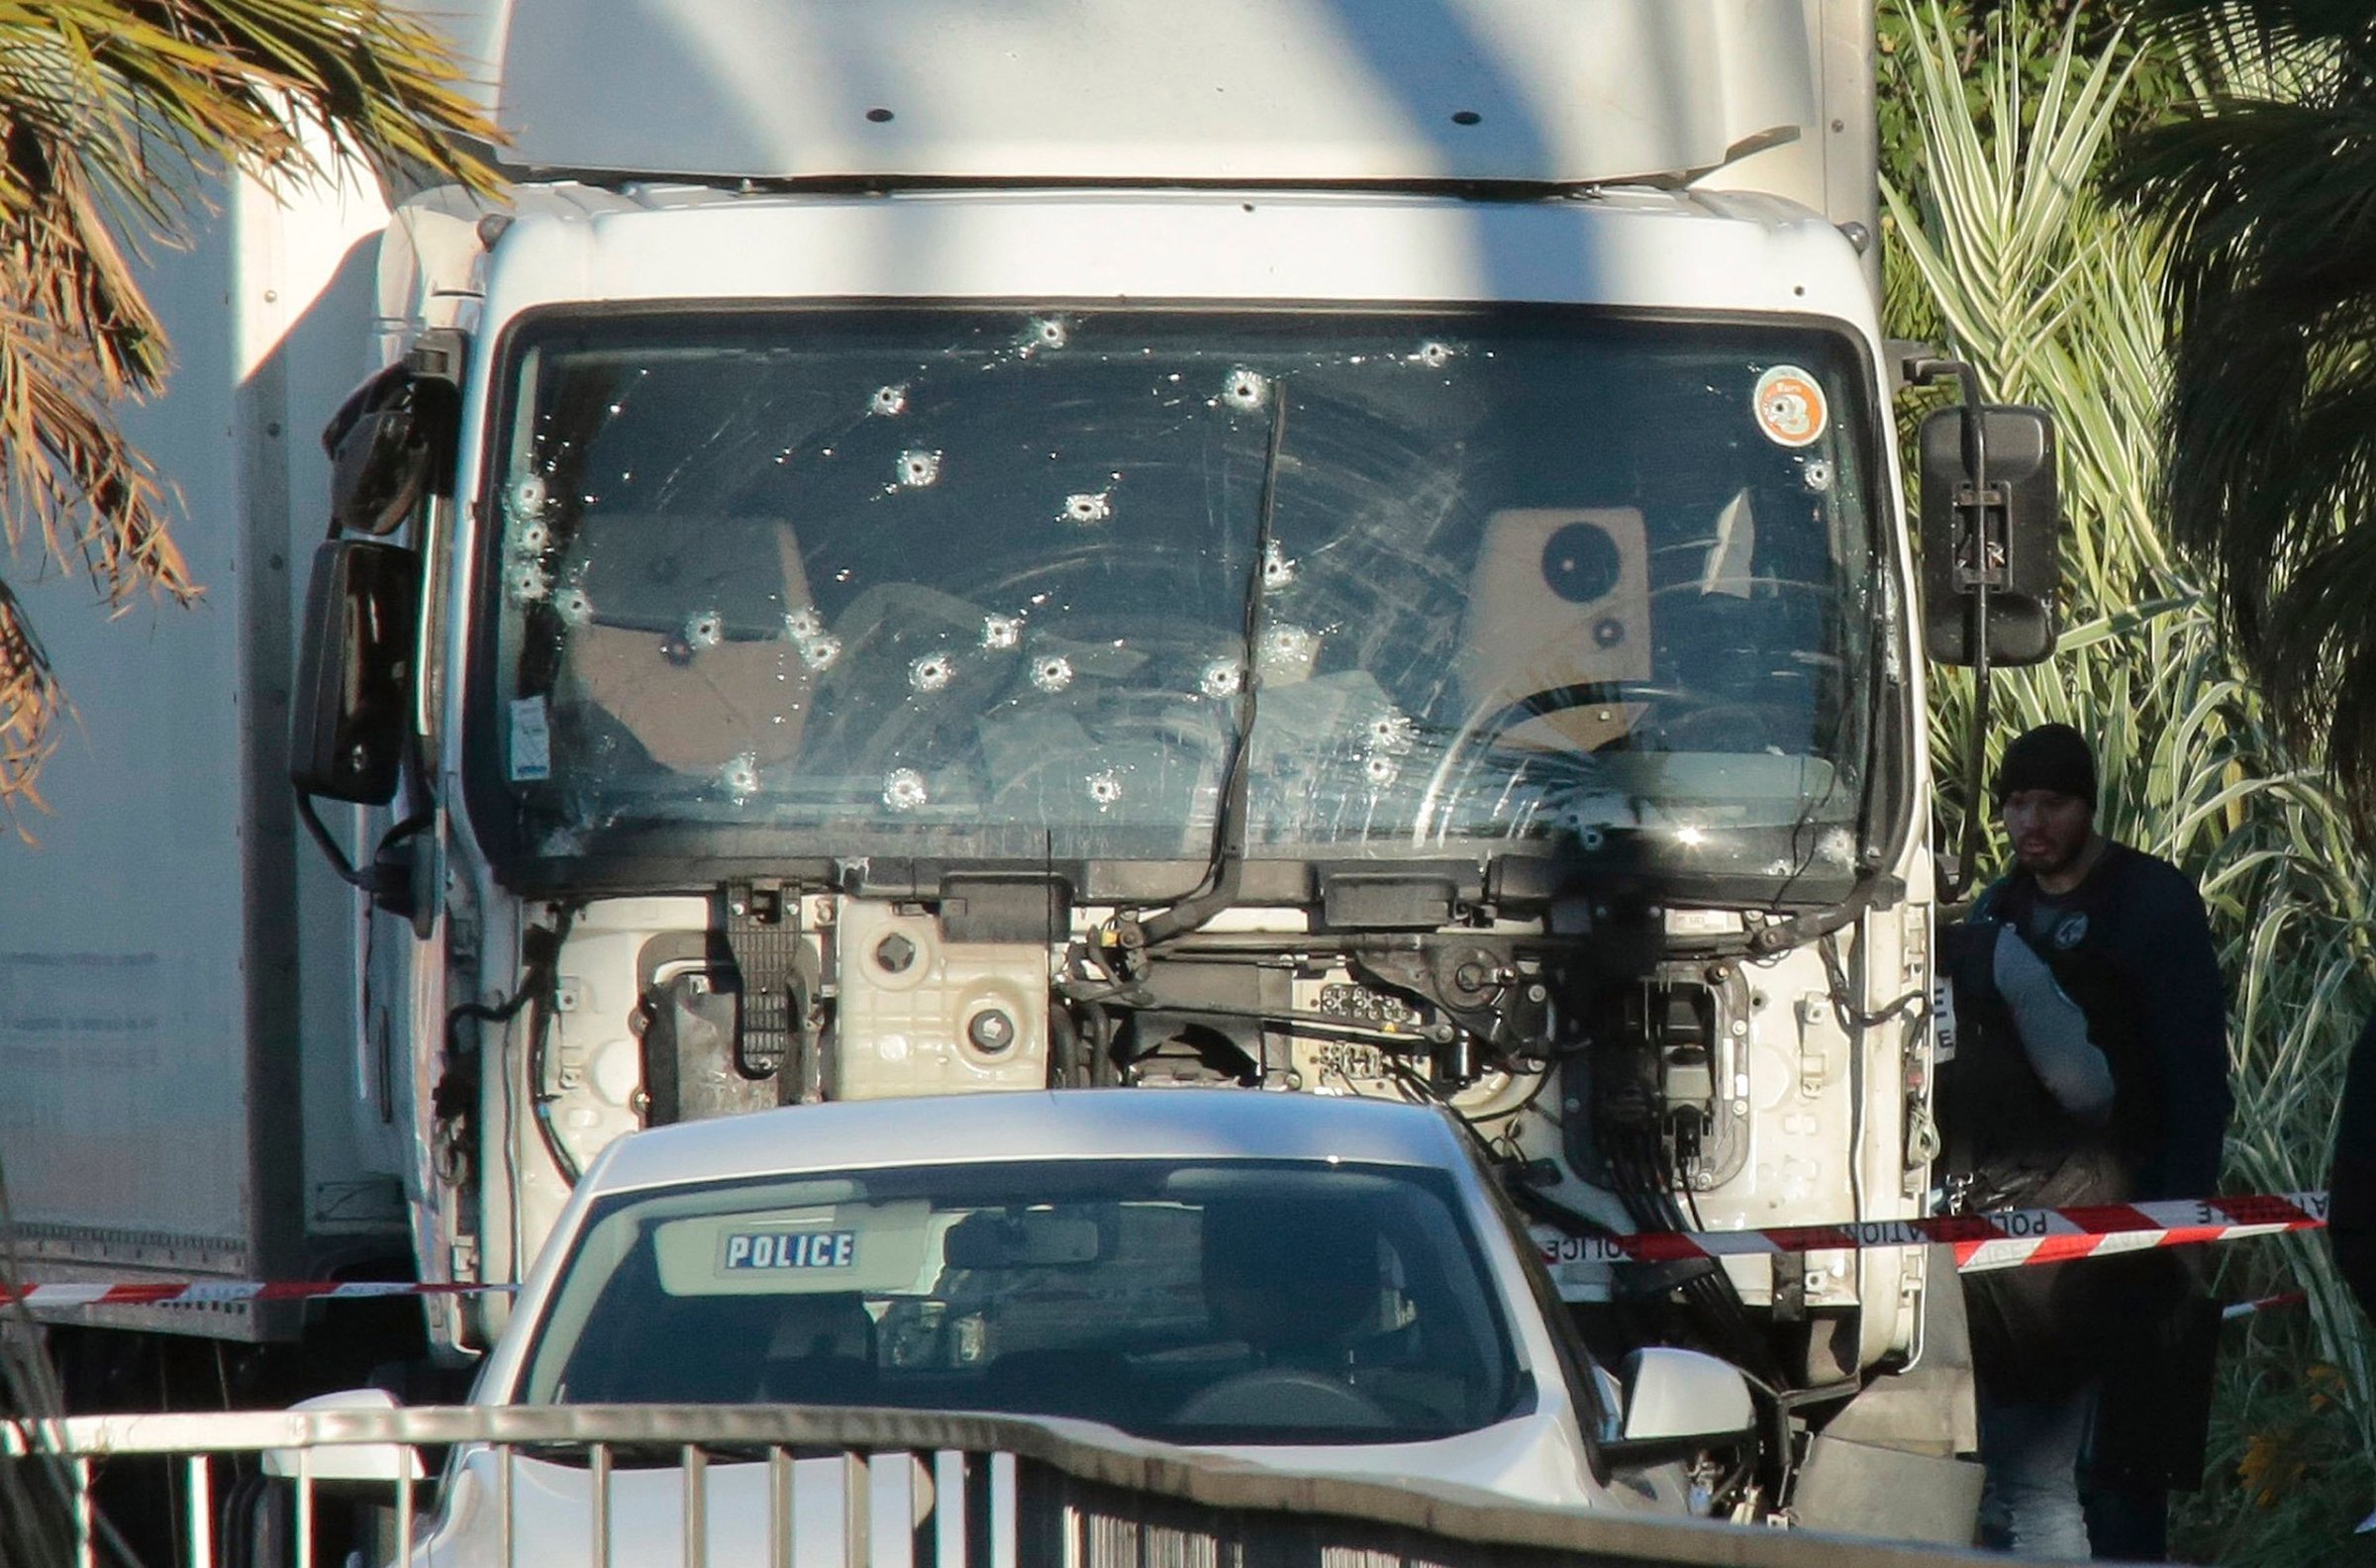 Forensic police investigate the truck at the scene of the terror attack on the Promenade des Anglais in Nice, France, on July 15, 2016. Authorities said a French-Tunisian attacker killed 84 people as he drove a truck through crowds, gathered to watch a firework display during Bastille Day celebrations. The attacker then opened fire on people in the crowd before being shot dead by police. Patrick Aventurier—Getty Images